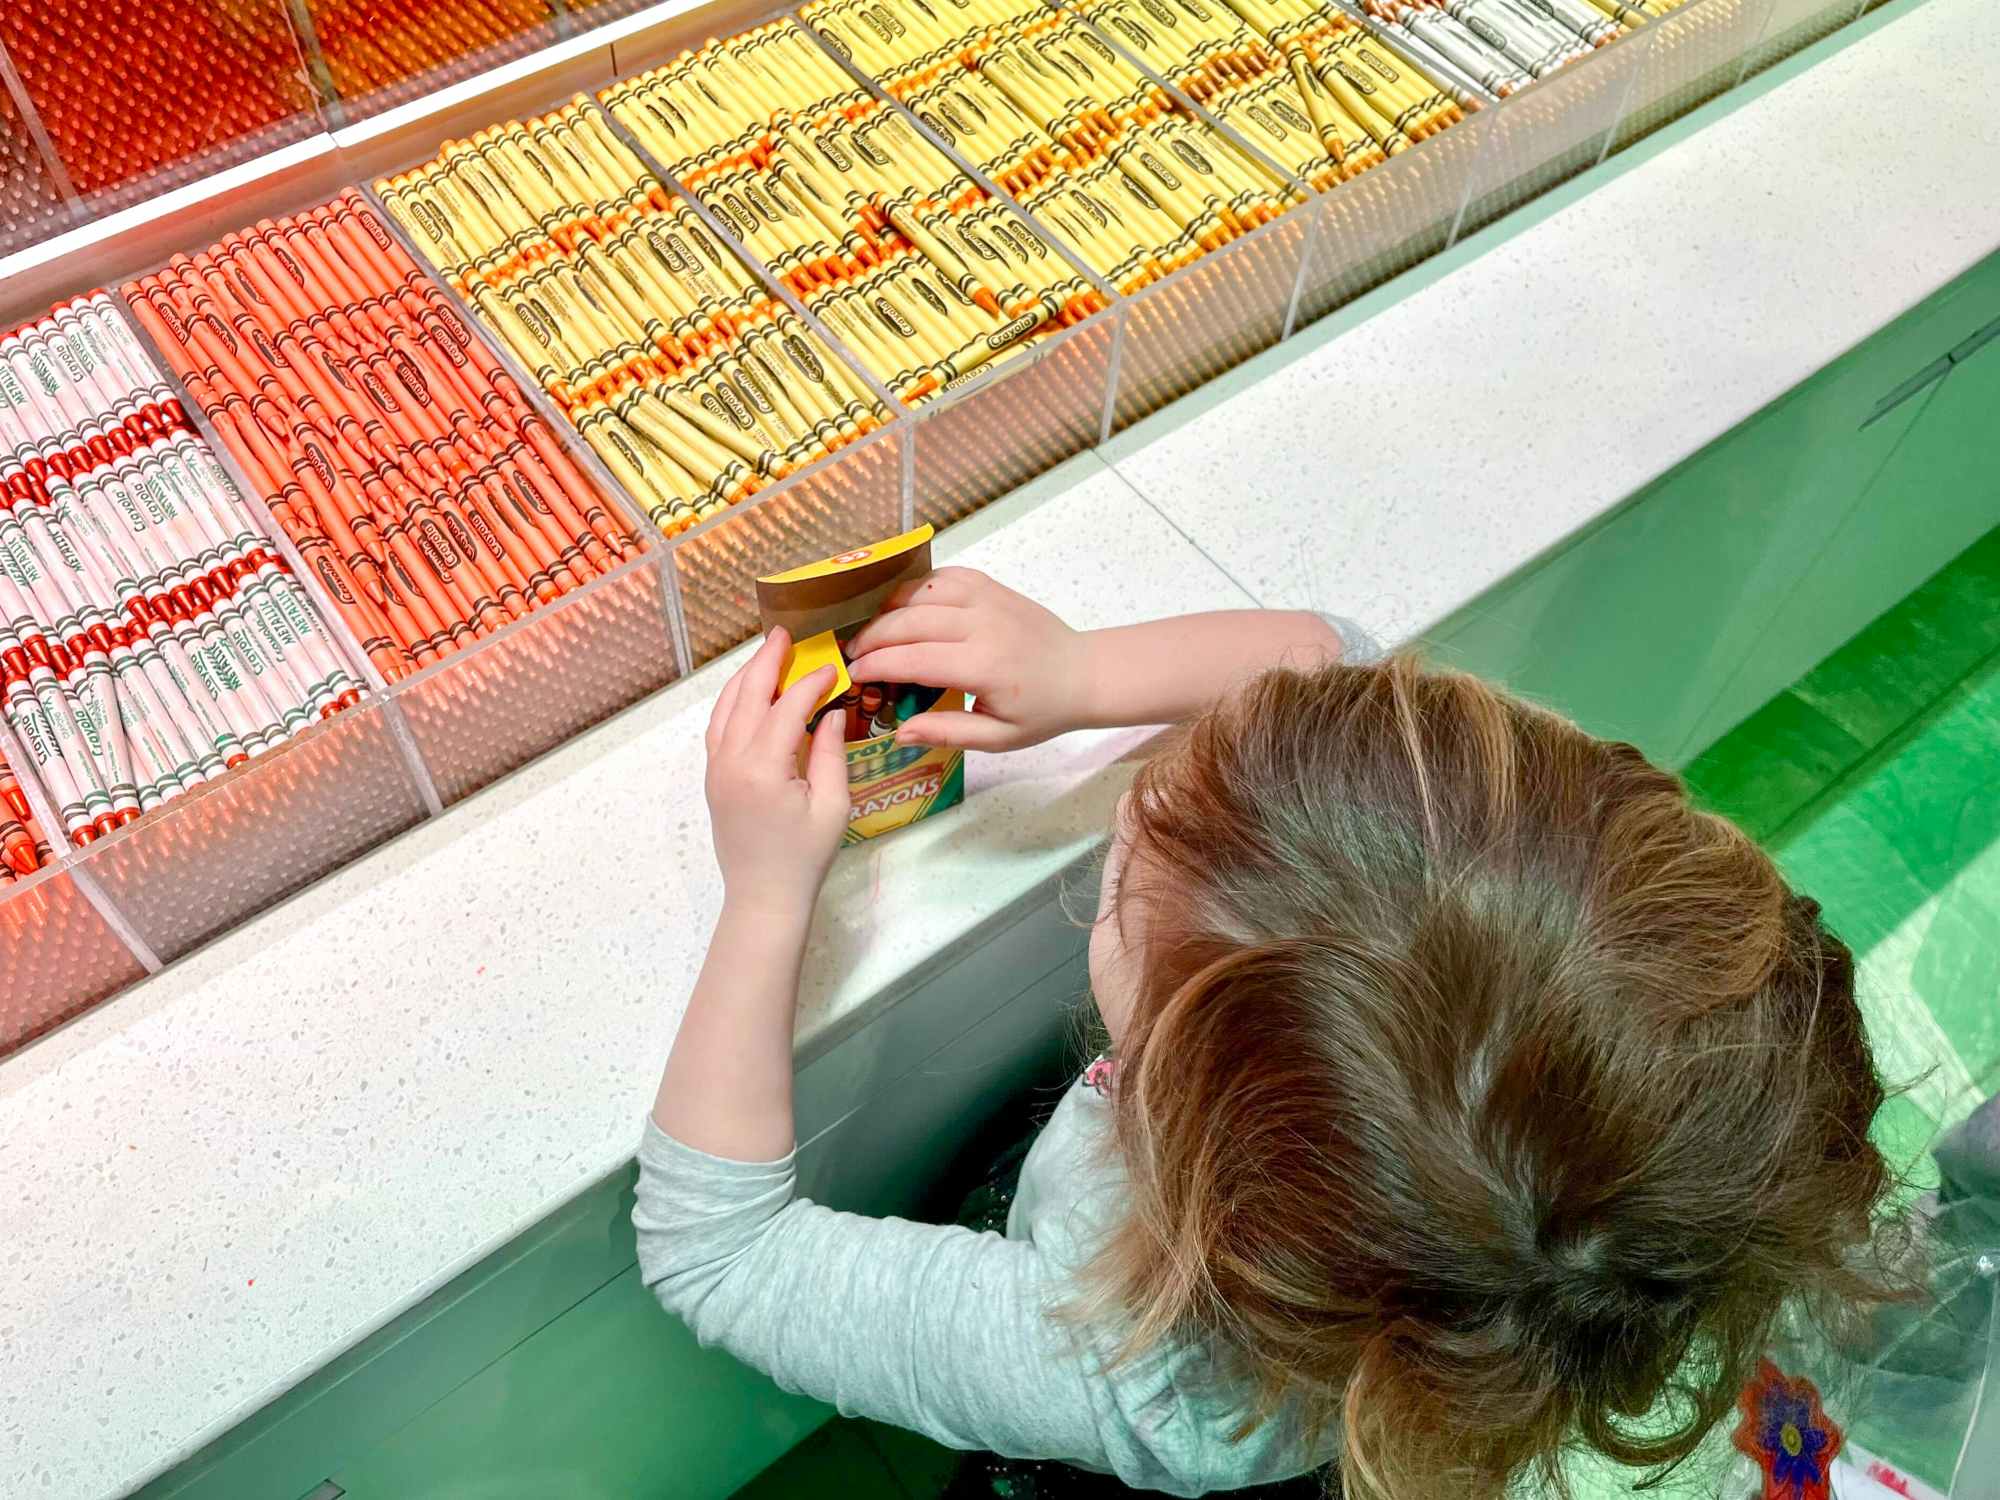 A child picking out crayons at the Crayola Experience location